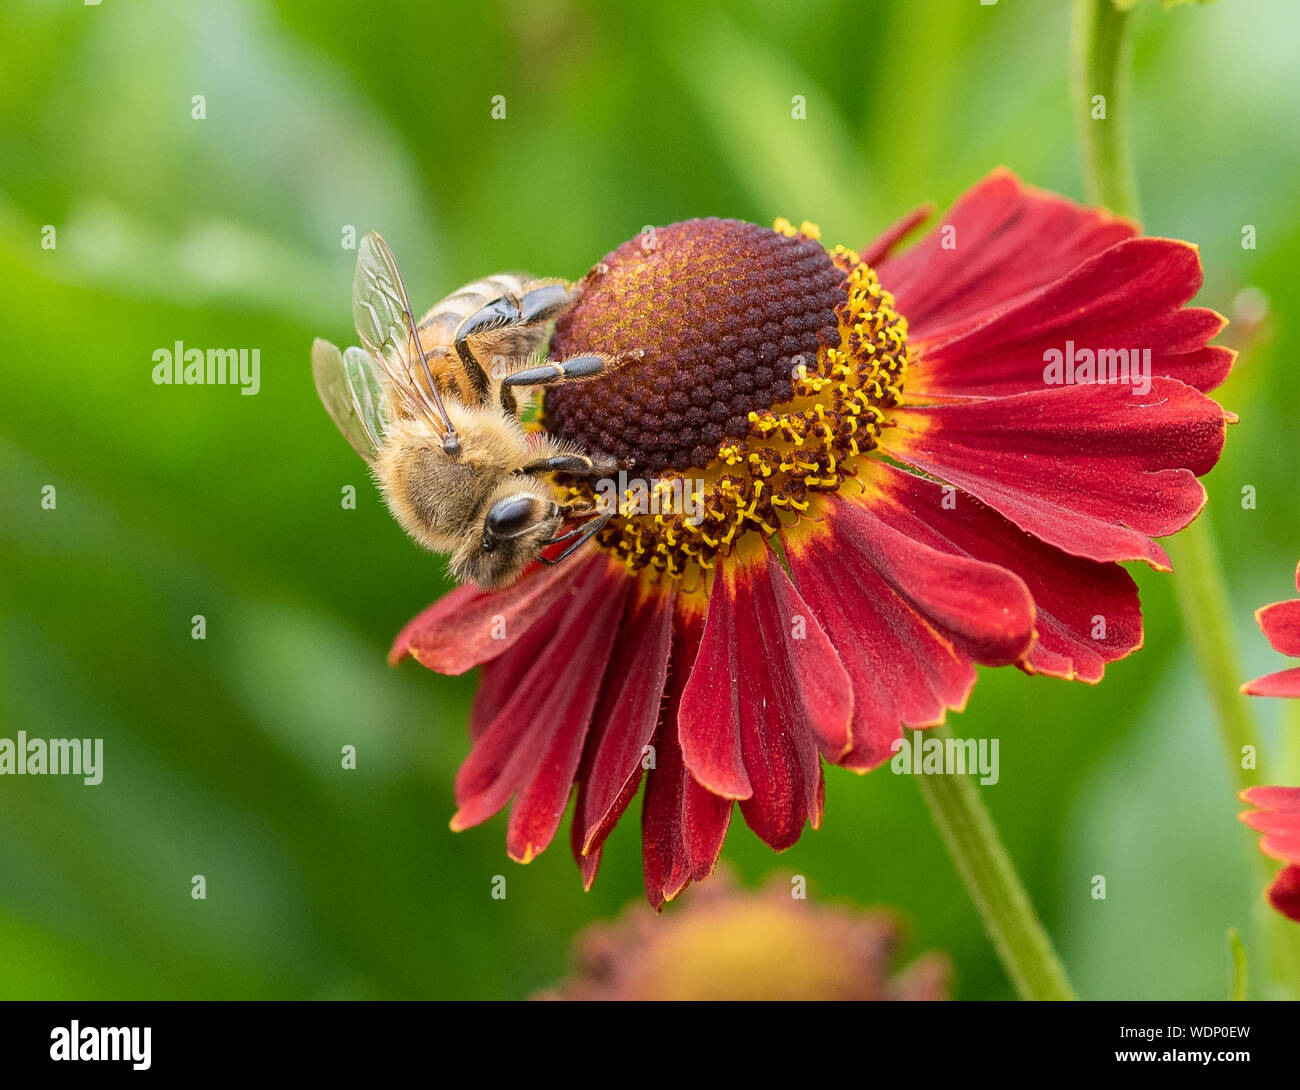 Macro photography close up of a honey bee collecting pollen on a red Helenium flower Stock Photo